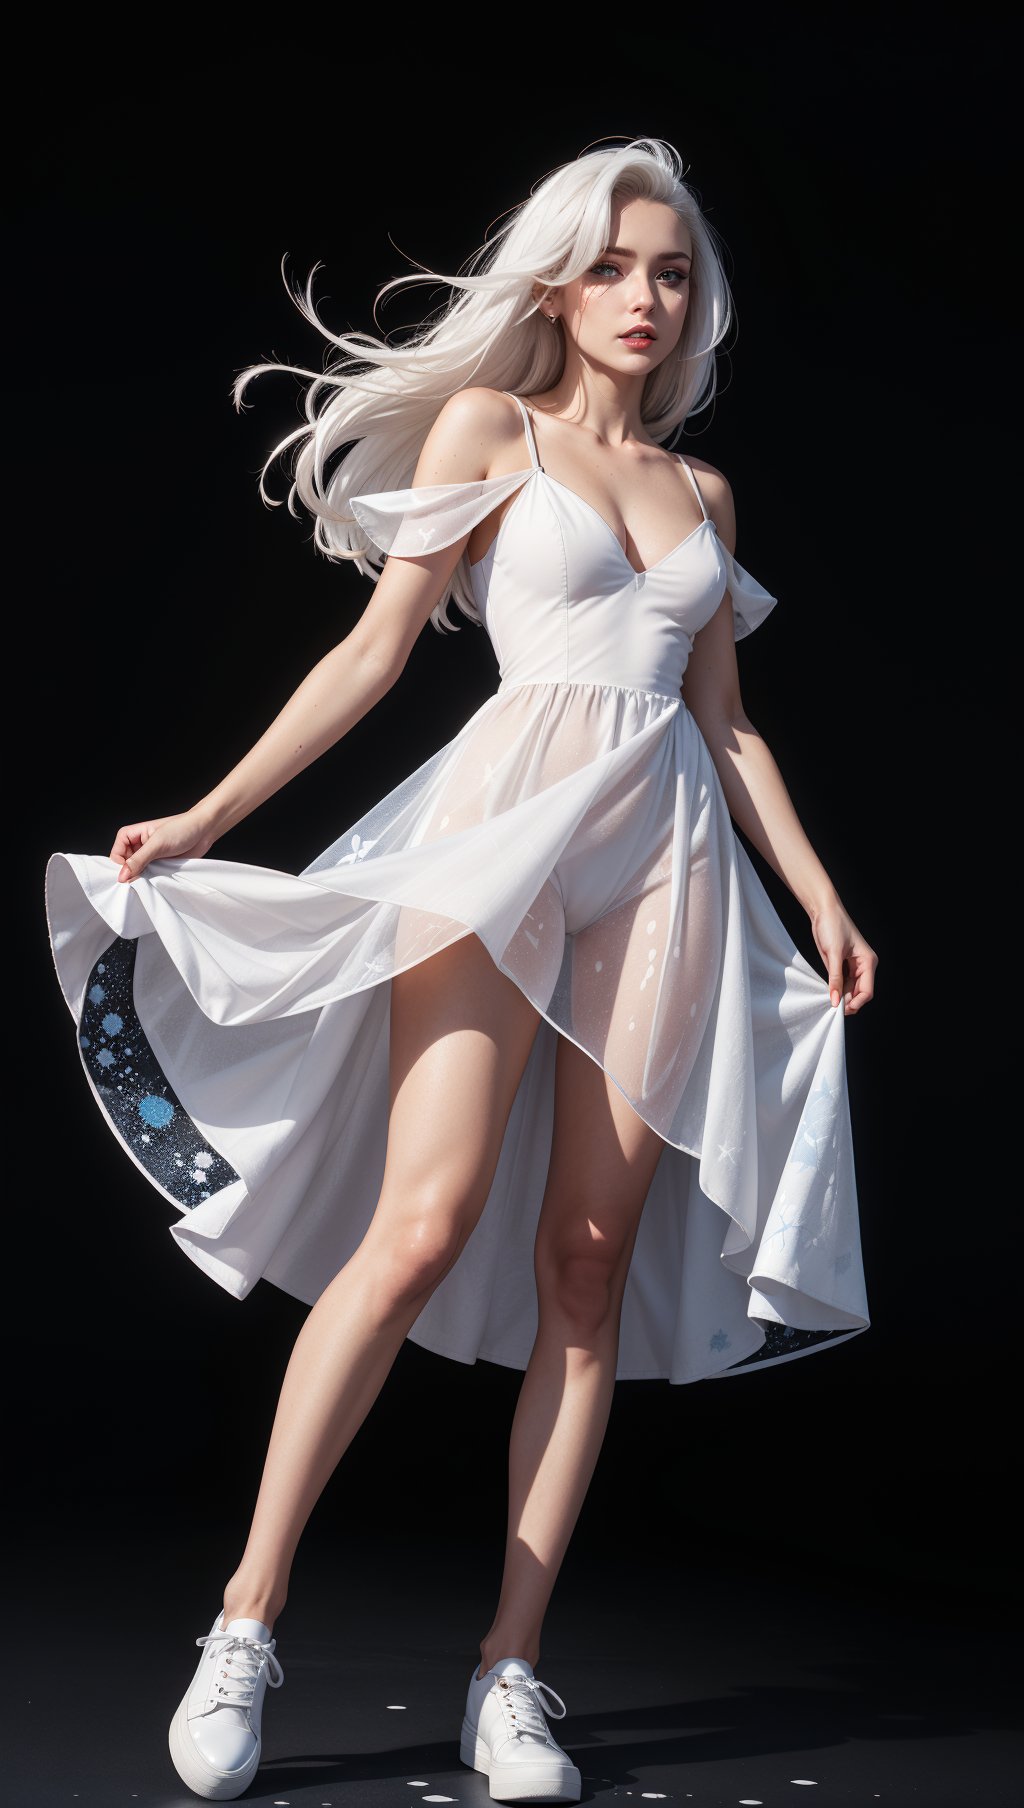 a woman with white hair and blue eyes,in a white dress with a black background and a splashs of paint all over,Celestial Skin,dark skin,flower-pattern,see-through white dress,black under cloths,facing viewer,hair blowing in the wind,white shoes,fantasy,white fires all over,